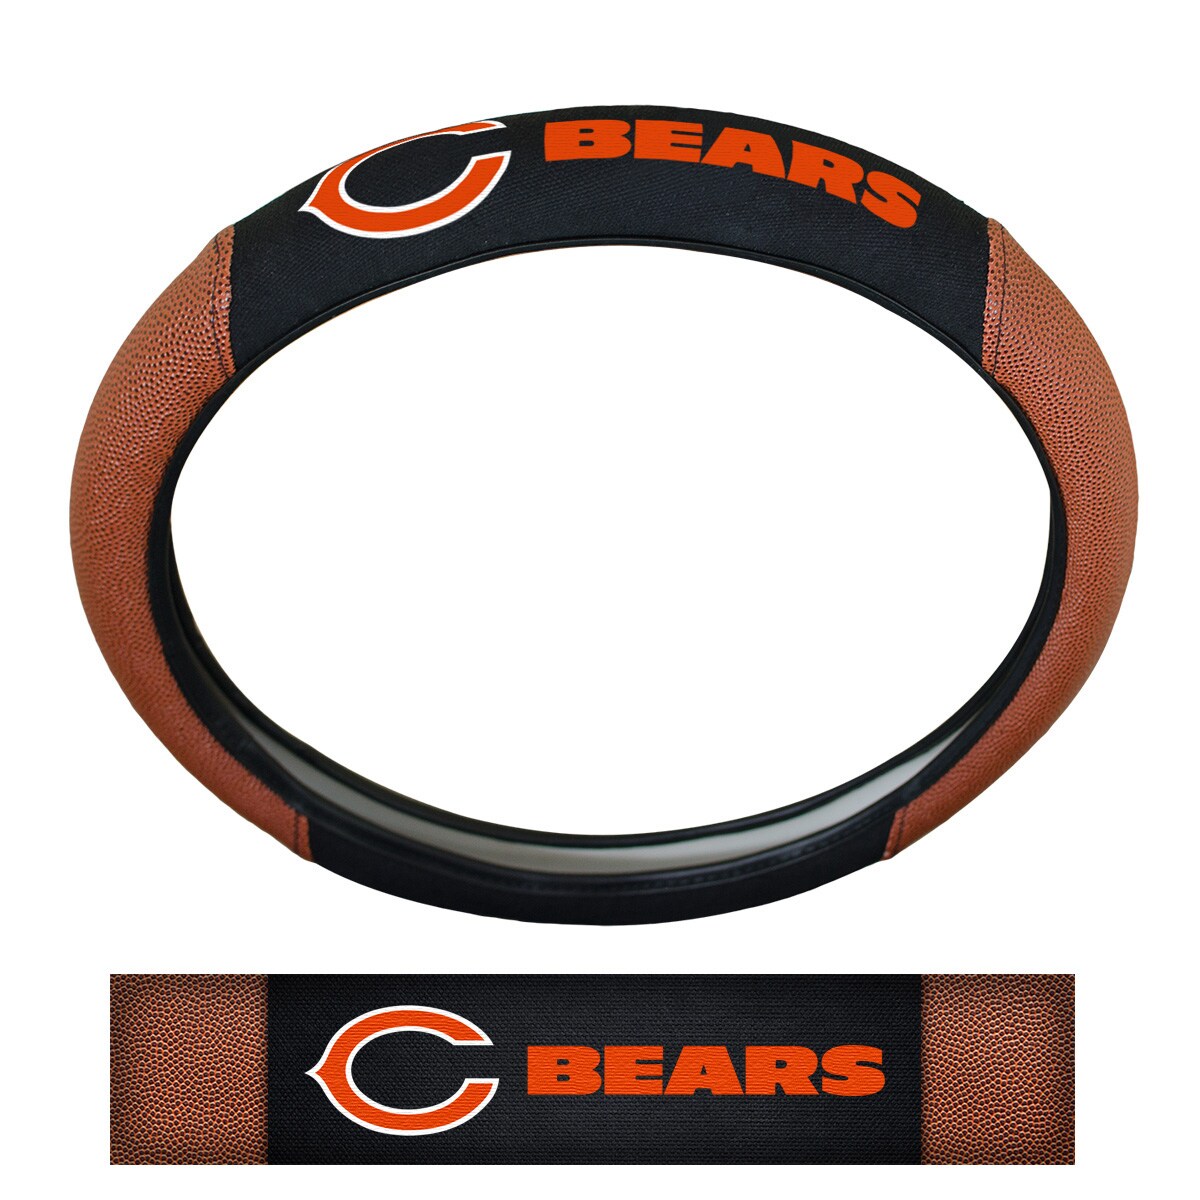 FANMATS NFL- Chicago Bears Sports Grip Steering Wheel Cover at